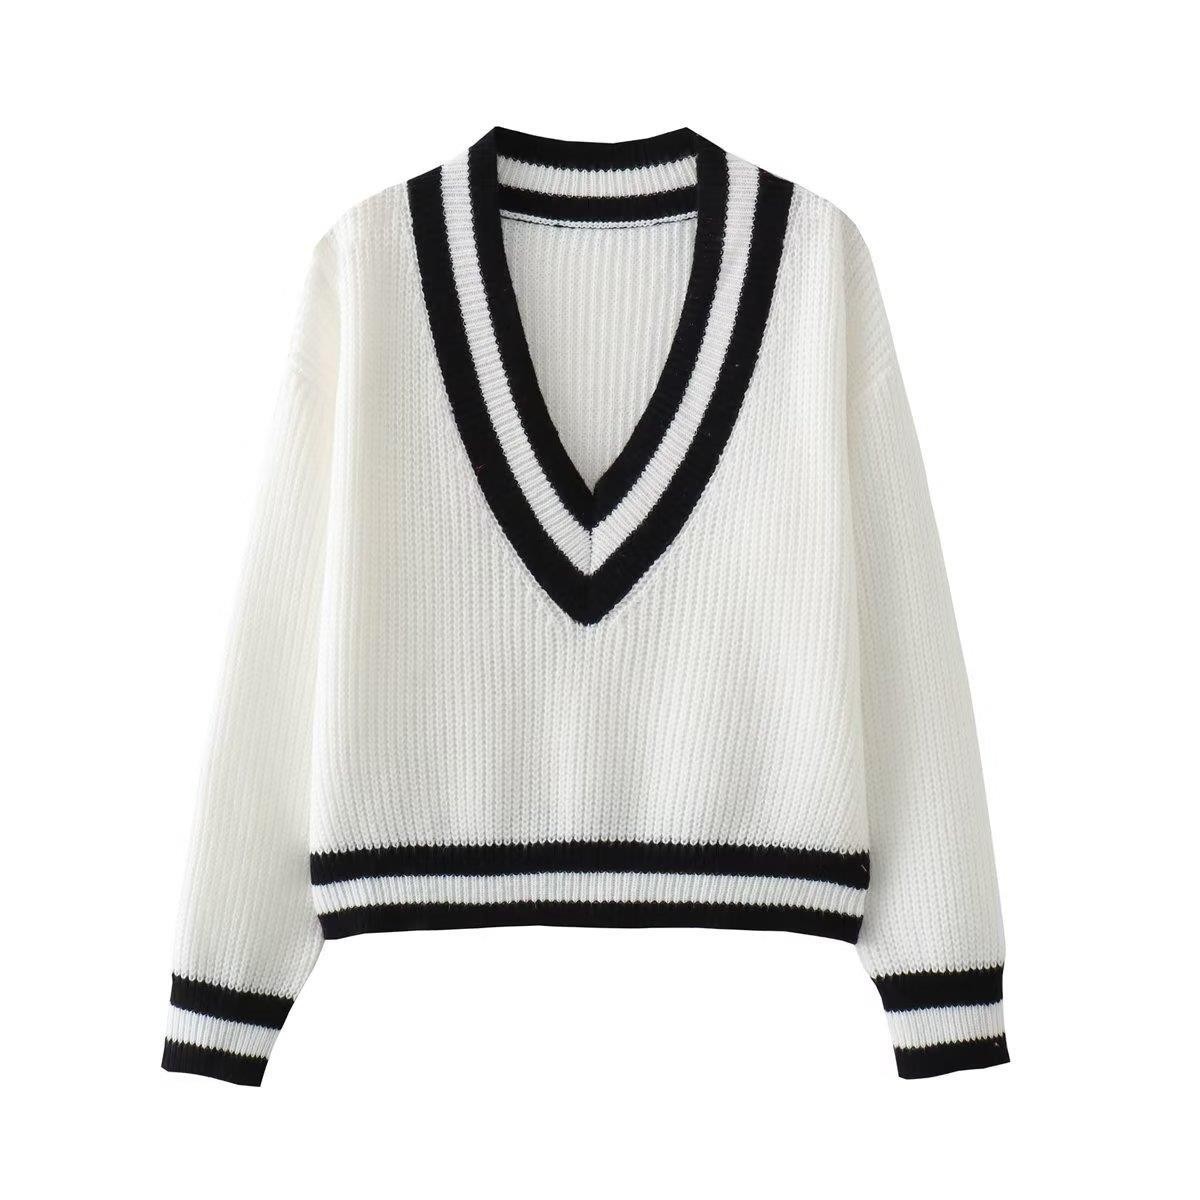 White Knitted Women Loose Sweater Long Sleeve